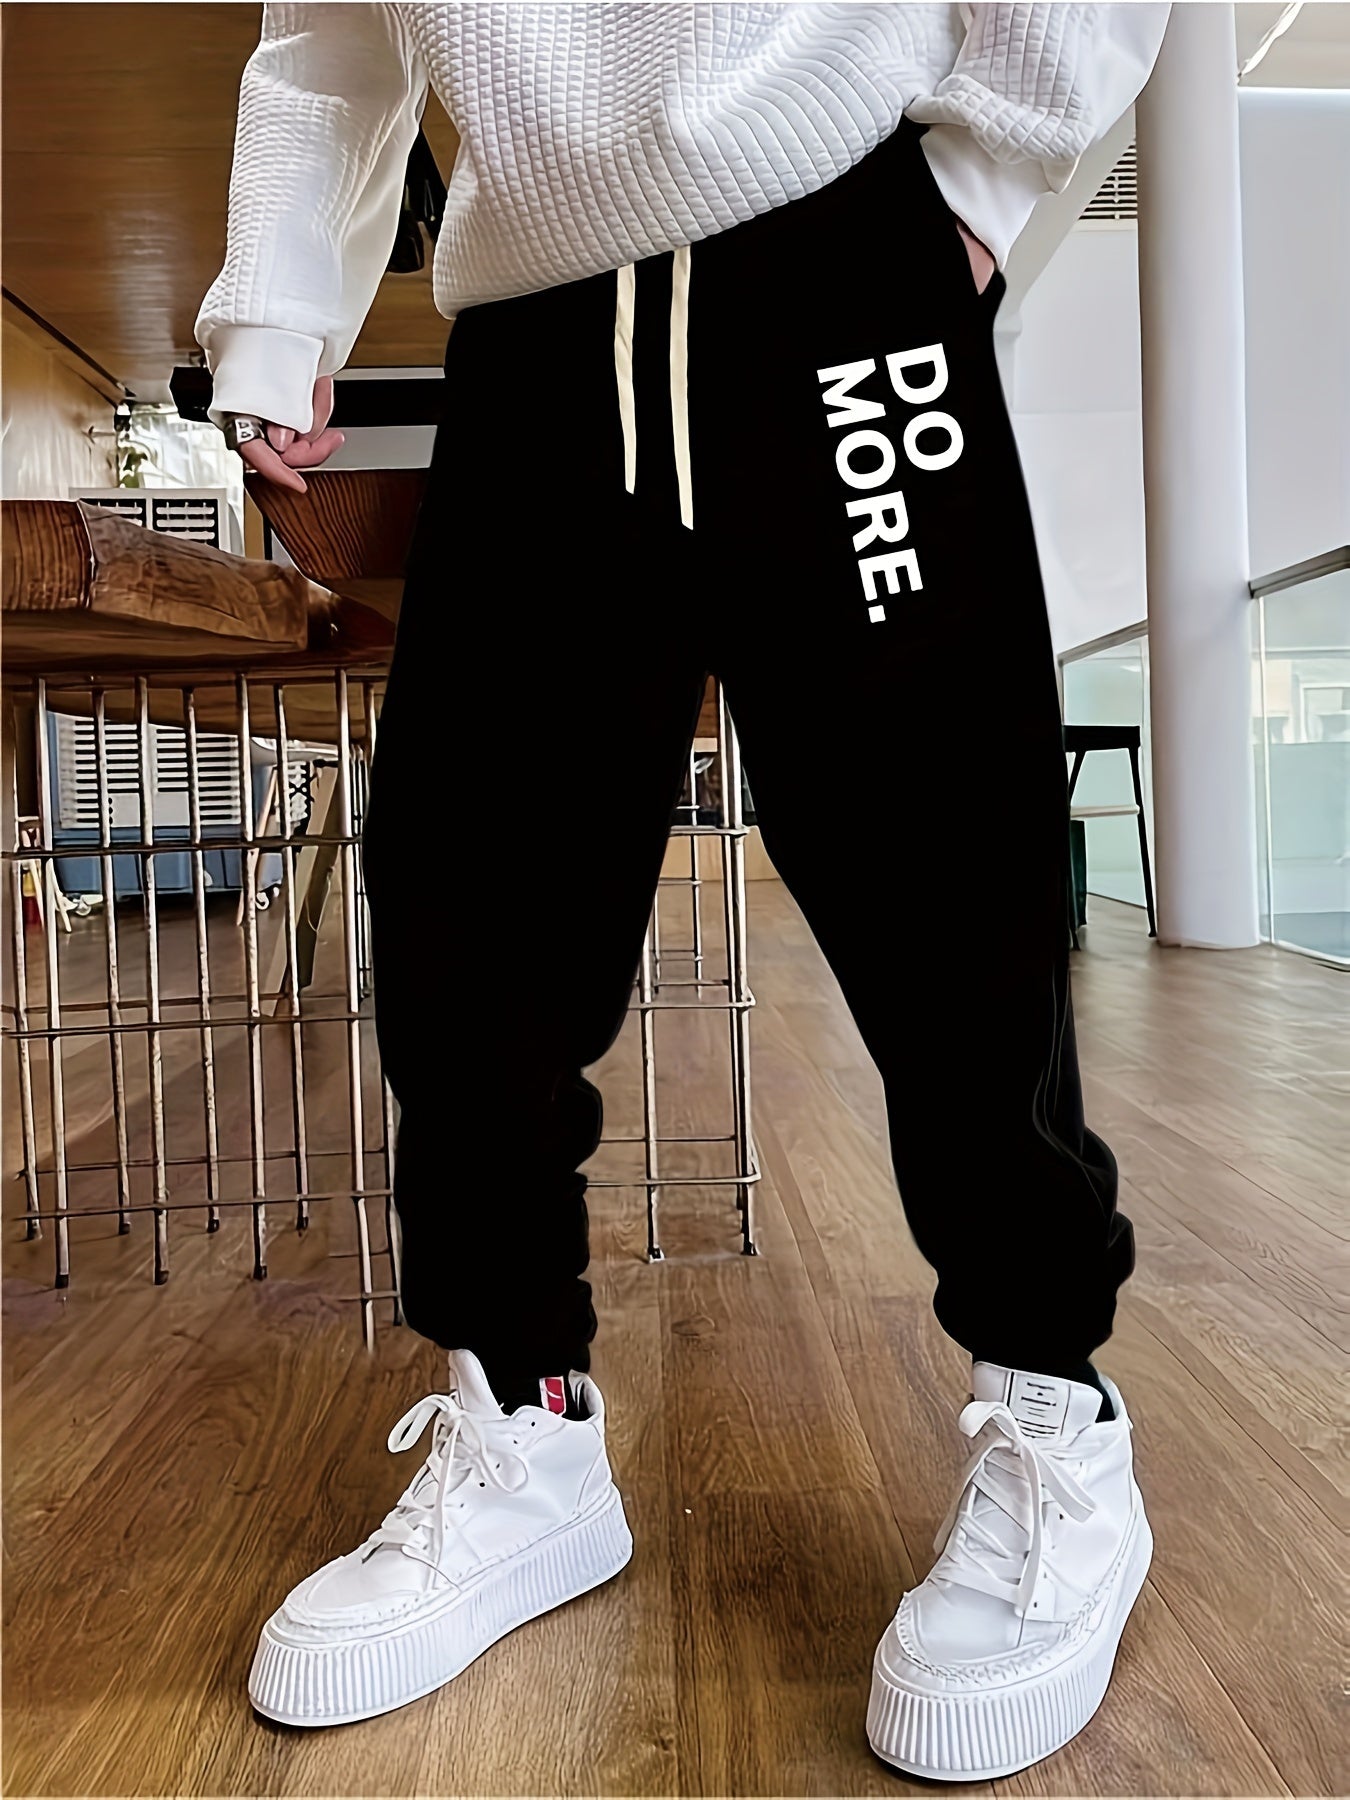 DO MORE Print Men's Chic Sports Jogger With Drawstring For All Seasons Outdoor, Men's Leisurewear